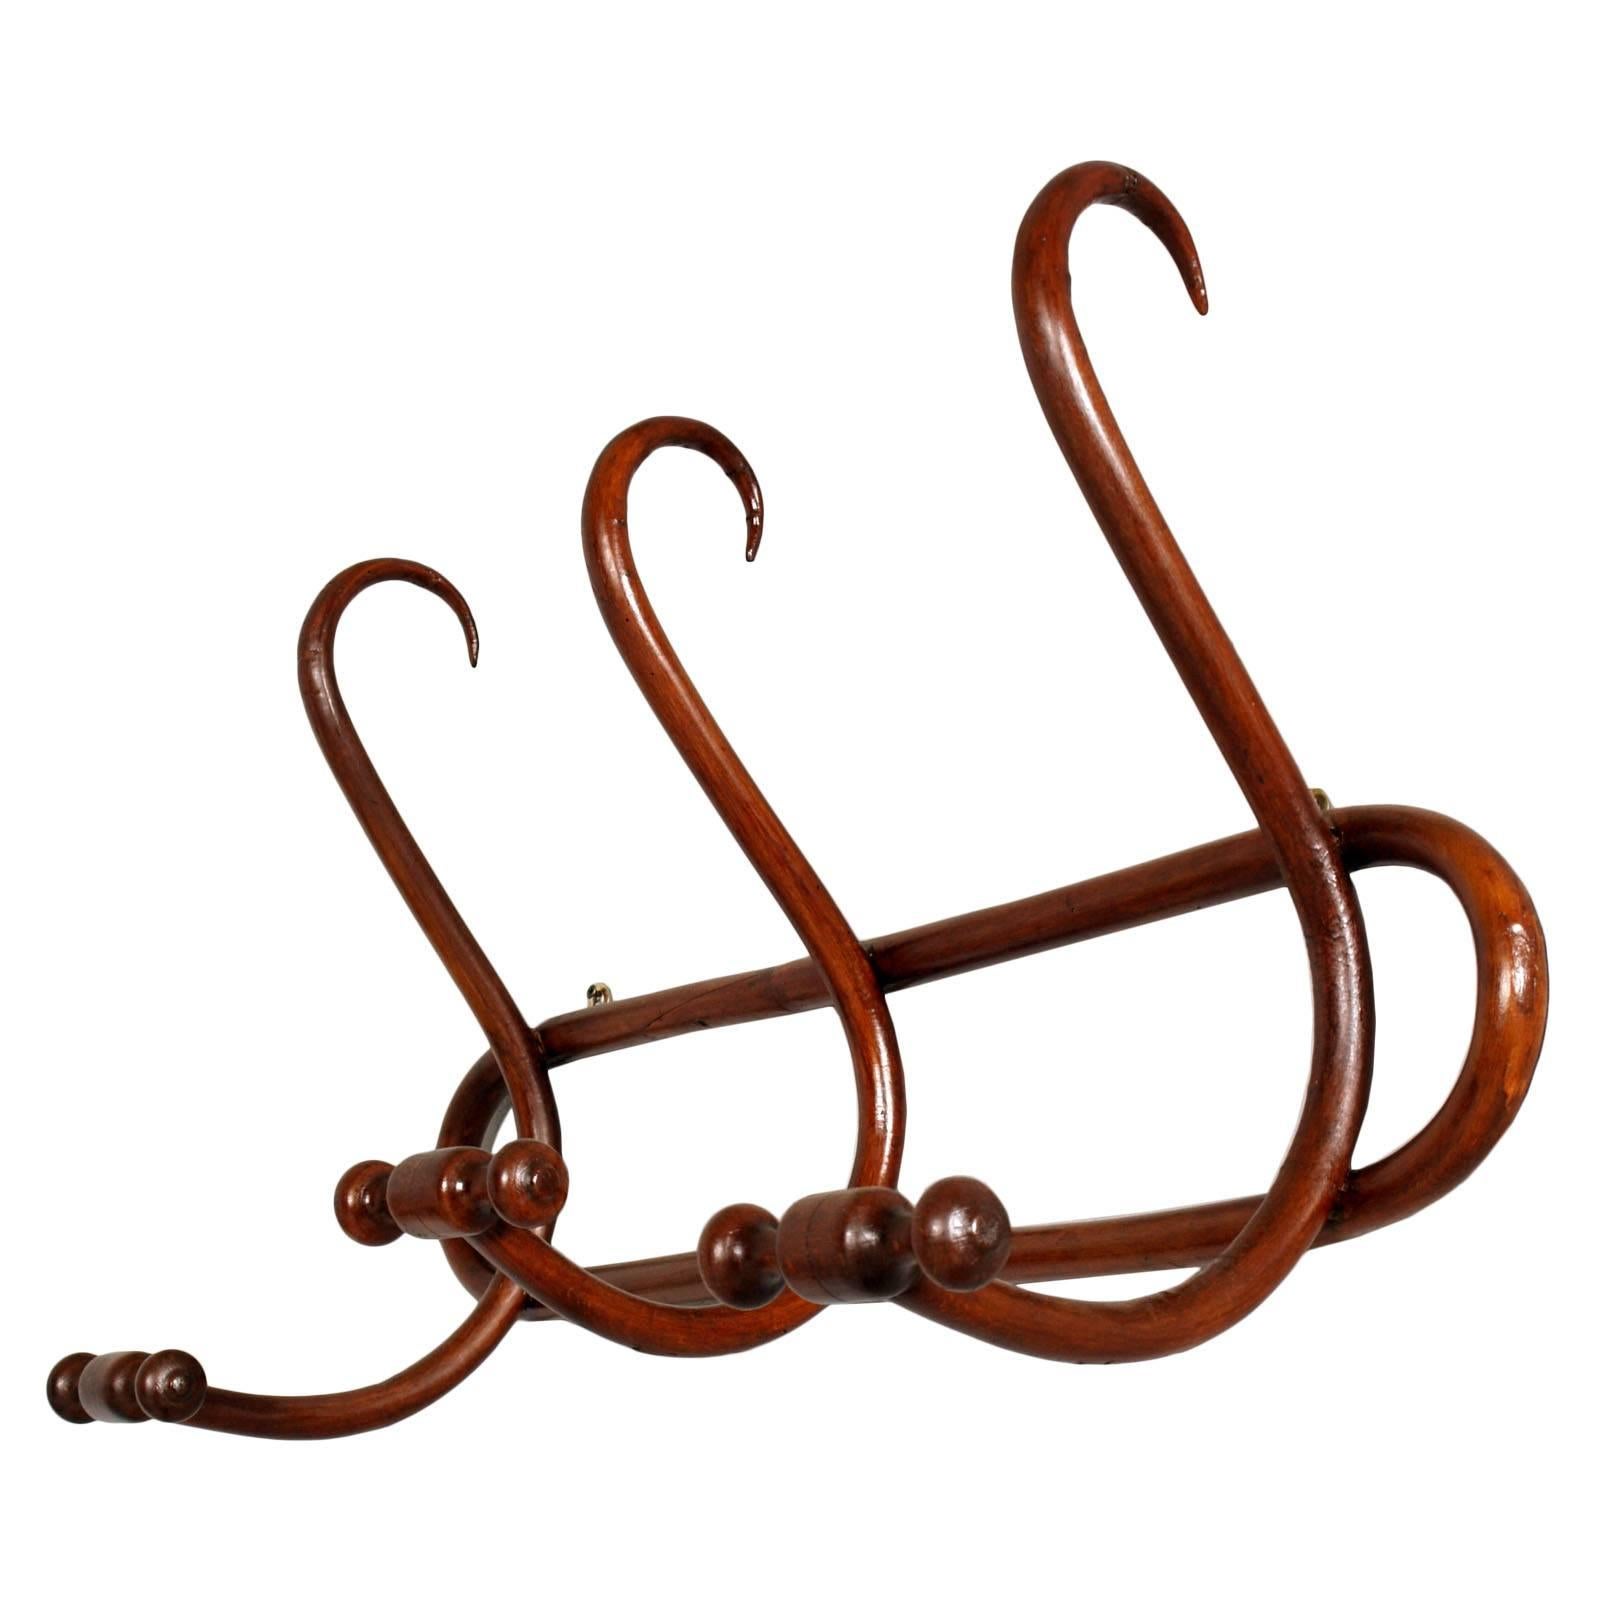 Elegant original early 20th century Art Nouveau bentwood wall coat rack by Thonet Vienna, in walnut, polished to wax. Excellent conditions.
Extremely rare unique piece.

Measures cm: H 45, W 75, D 25.